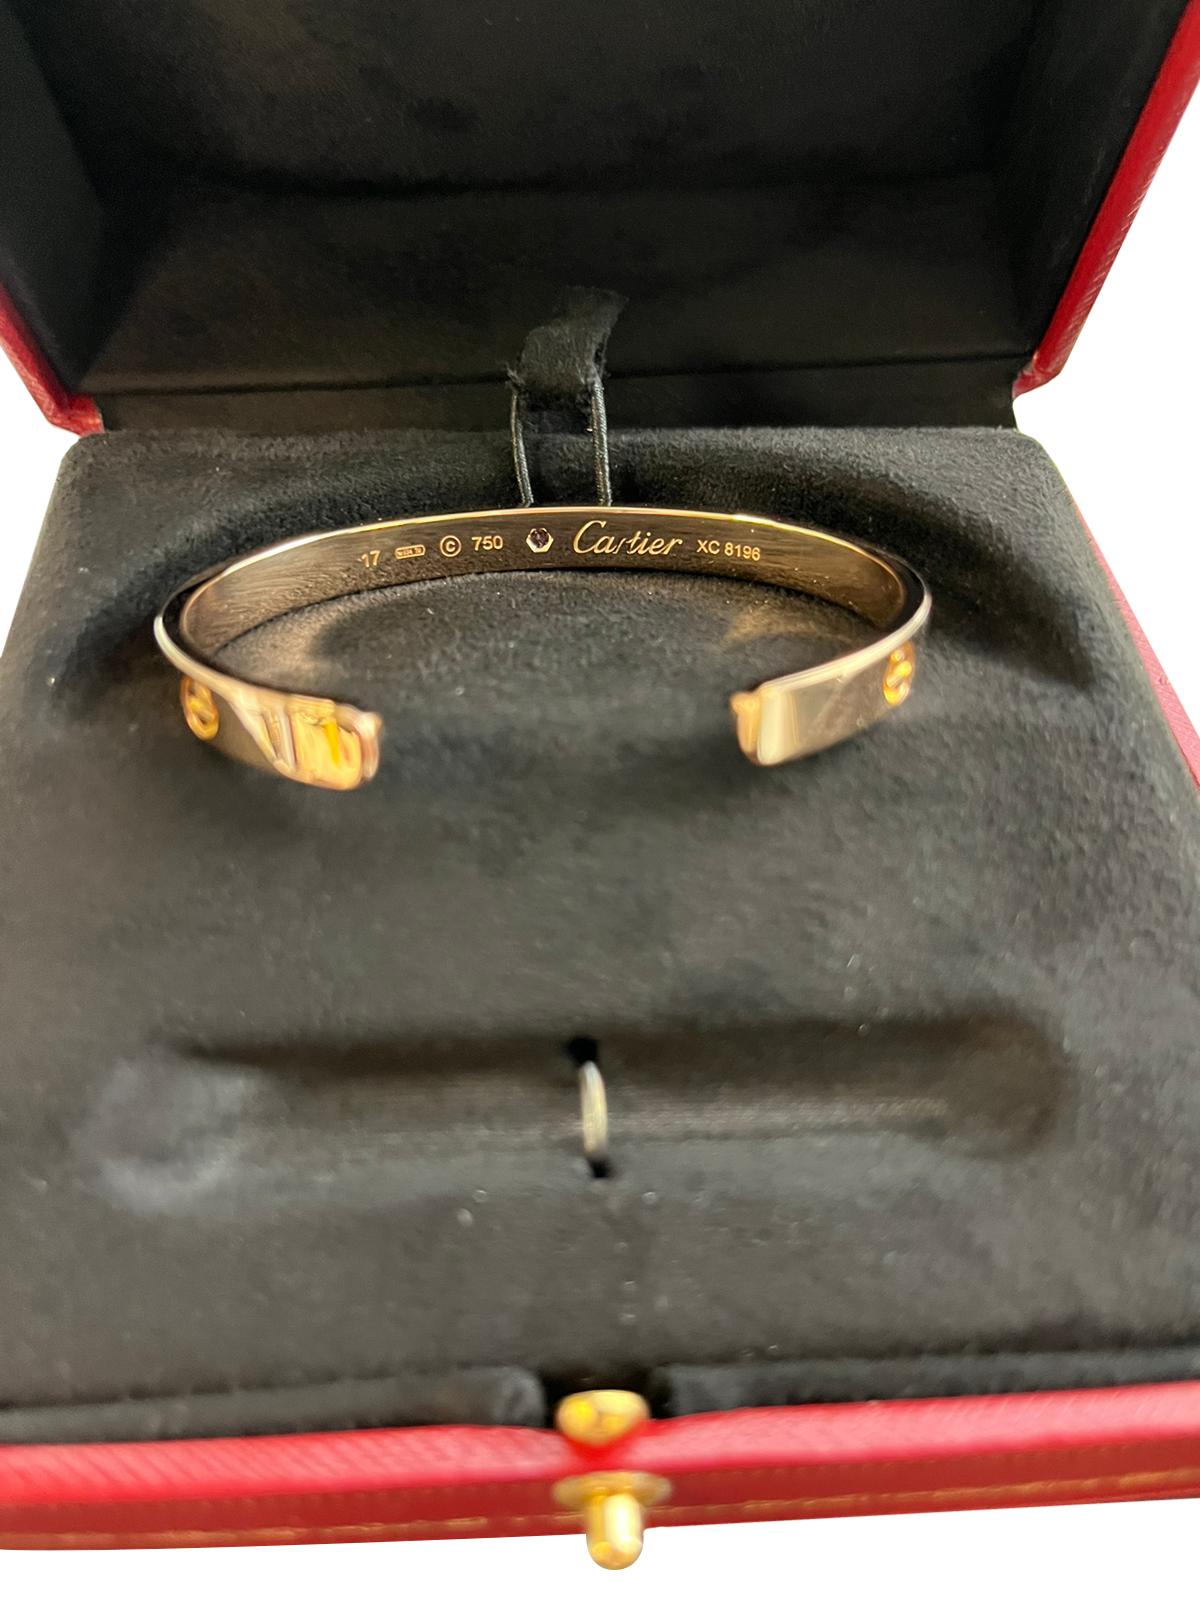 Cartier Love Bangle Bracelet 18 Karat Rose Gold with Sapphire Gemstone Size 17 In Good Condition For Sale In Aventura, FL